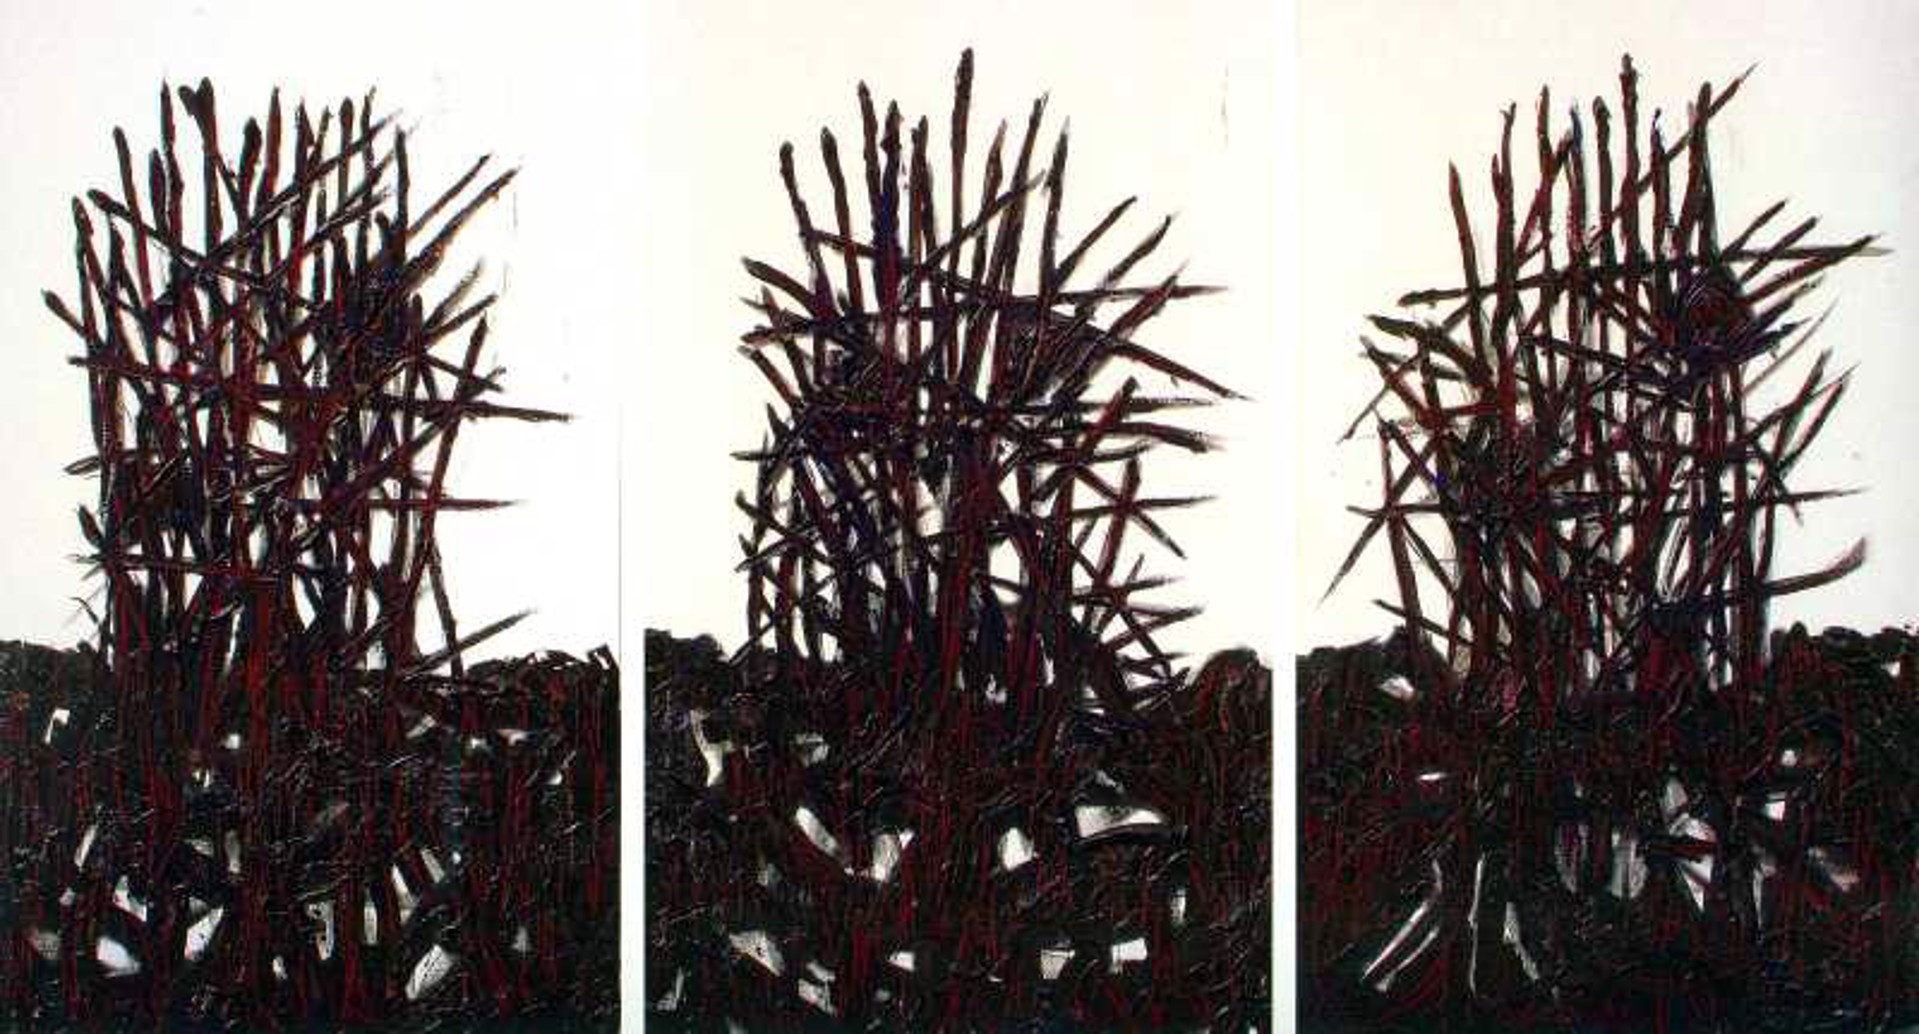 Weeds Triptych by Philip J. Romano